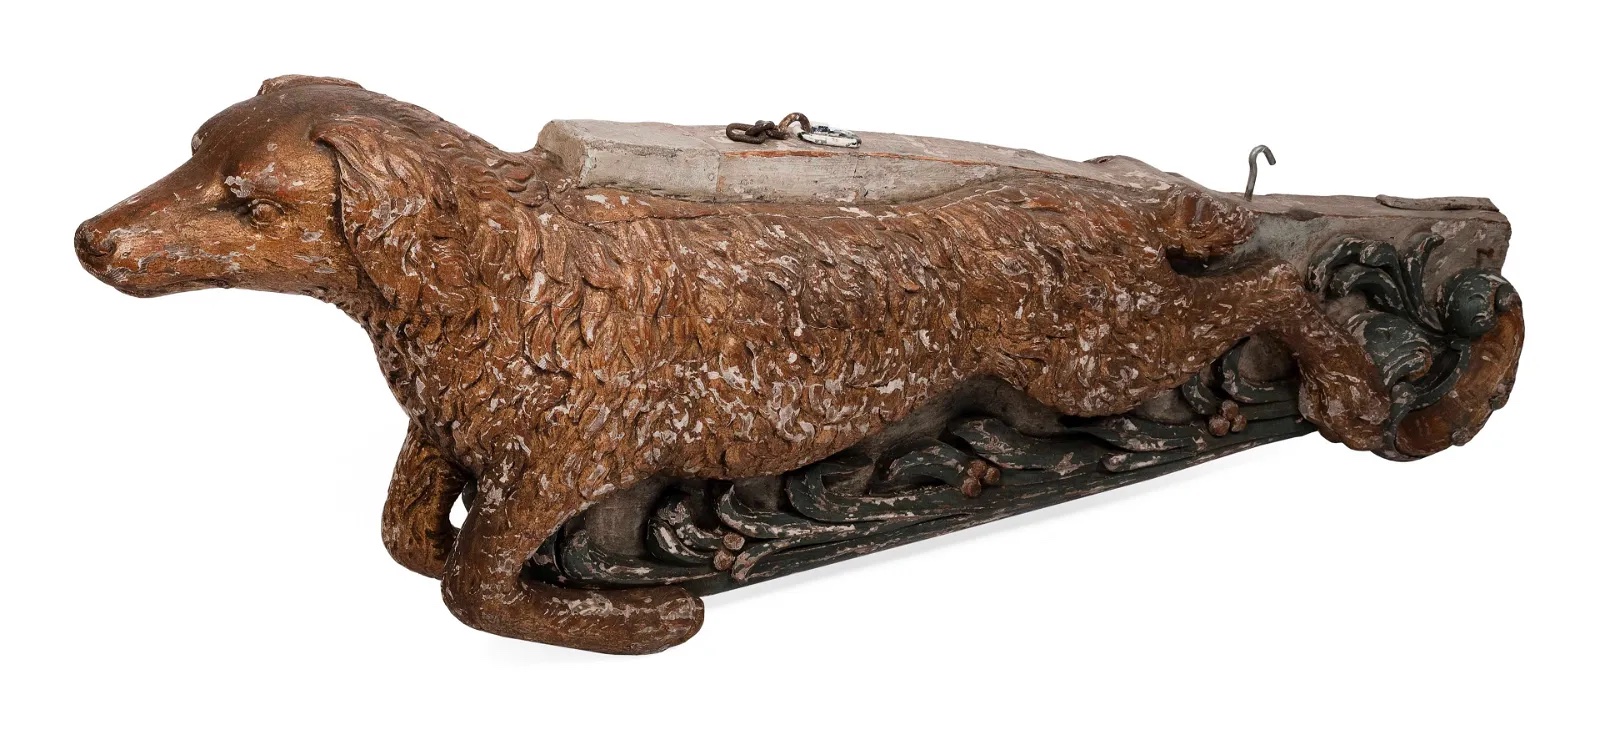 Canine ship’s figurehead, estimated at $25,000-$35,000 at Eldred's.